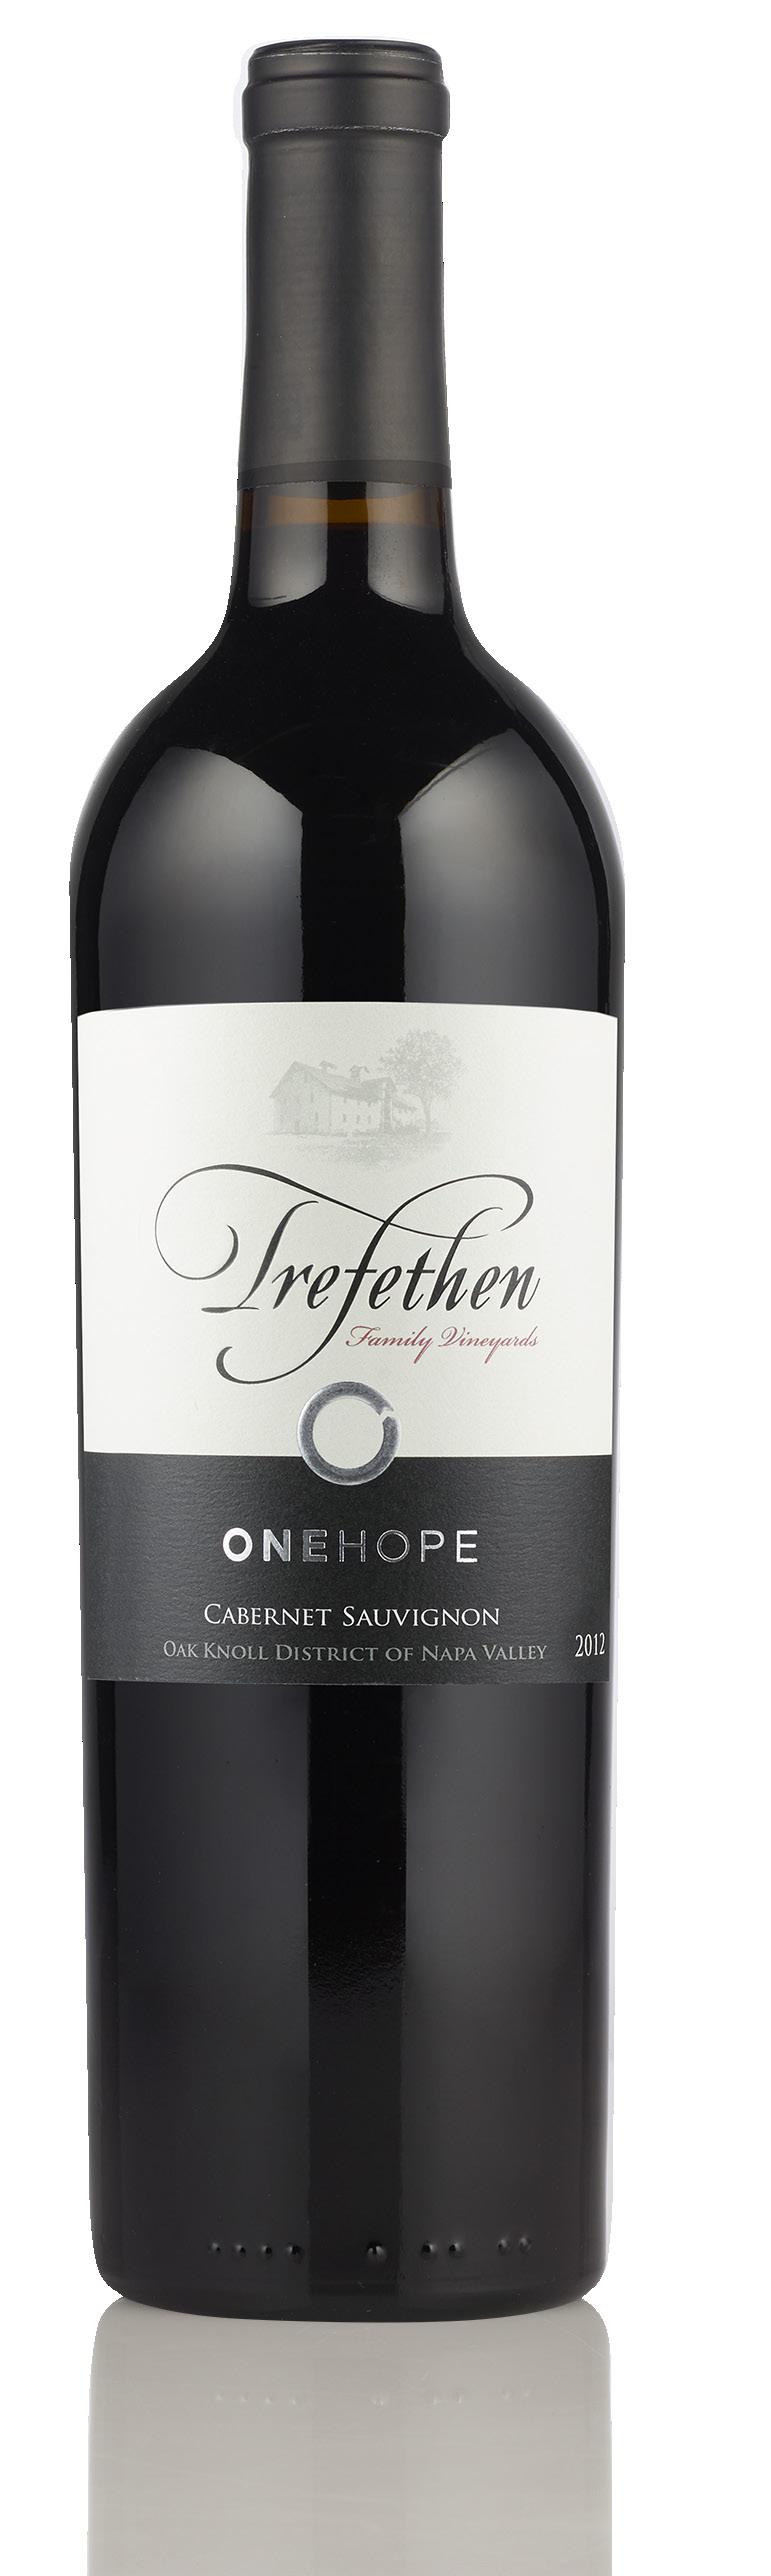 ONEHOPE X TREFETHEN cola ripe black cherry opulent vanilla Enticing aromas of blackberries, black cherries and currants with oak, clove and toffee notes on the nose.